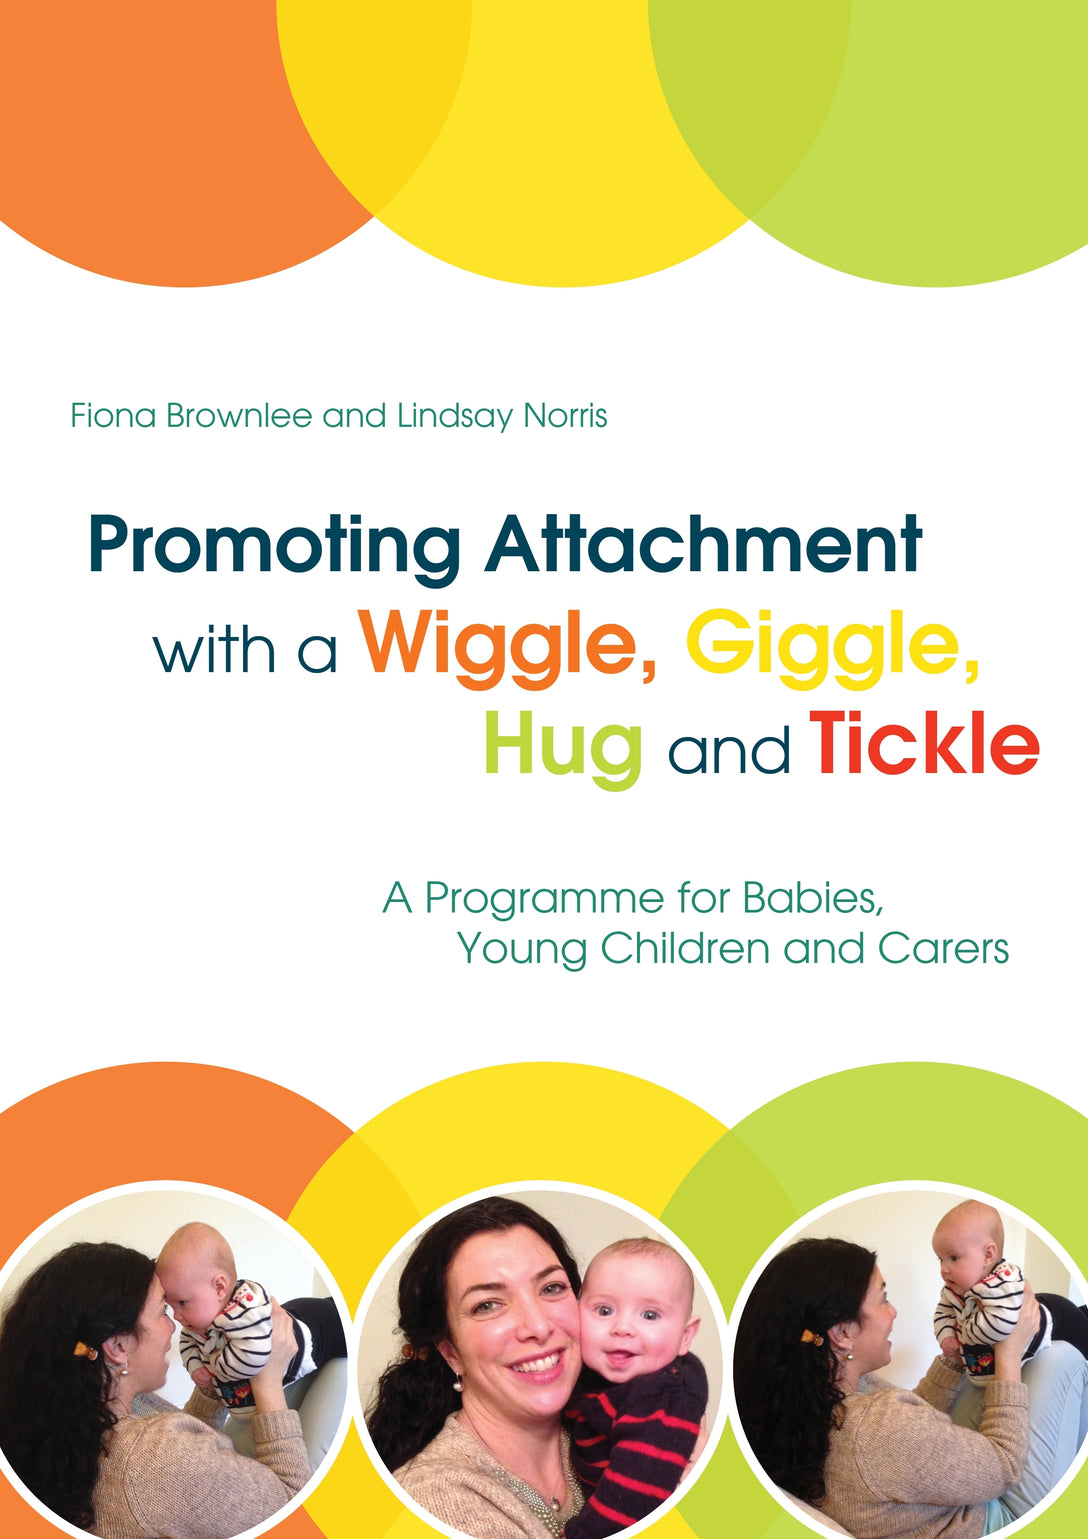 Promoting Attachment With a Wiggle, Giggle, Hug and Tickle by Fiona Brownlee, Lindsay Norris